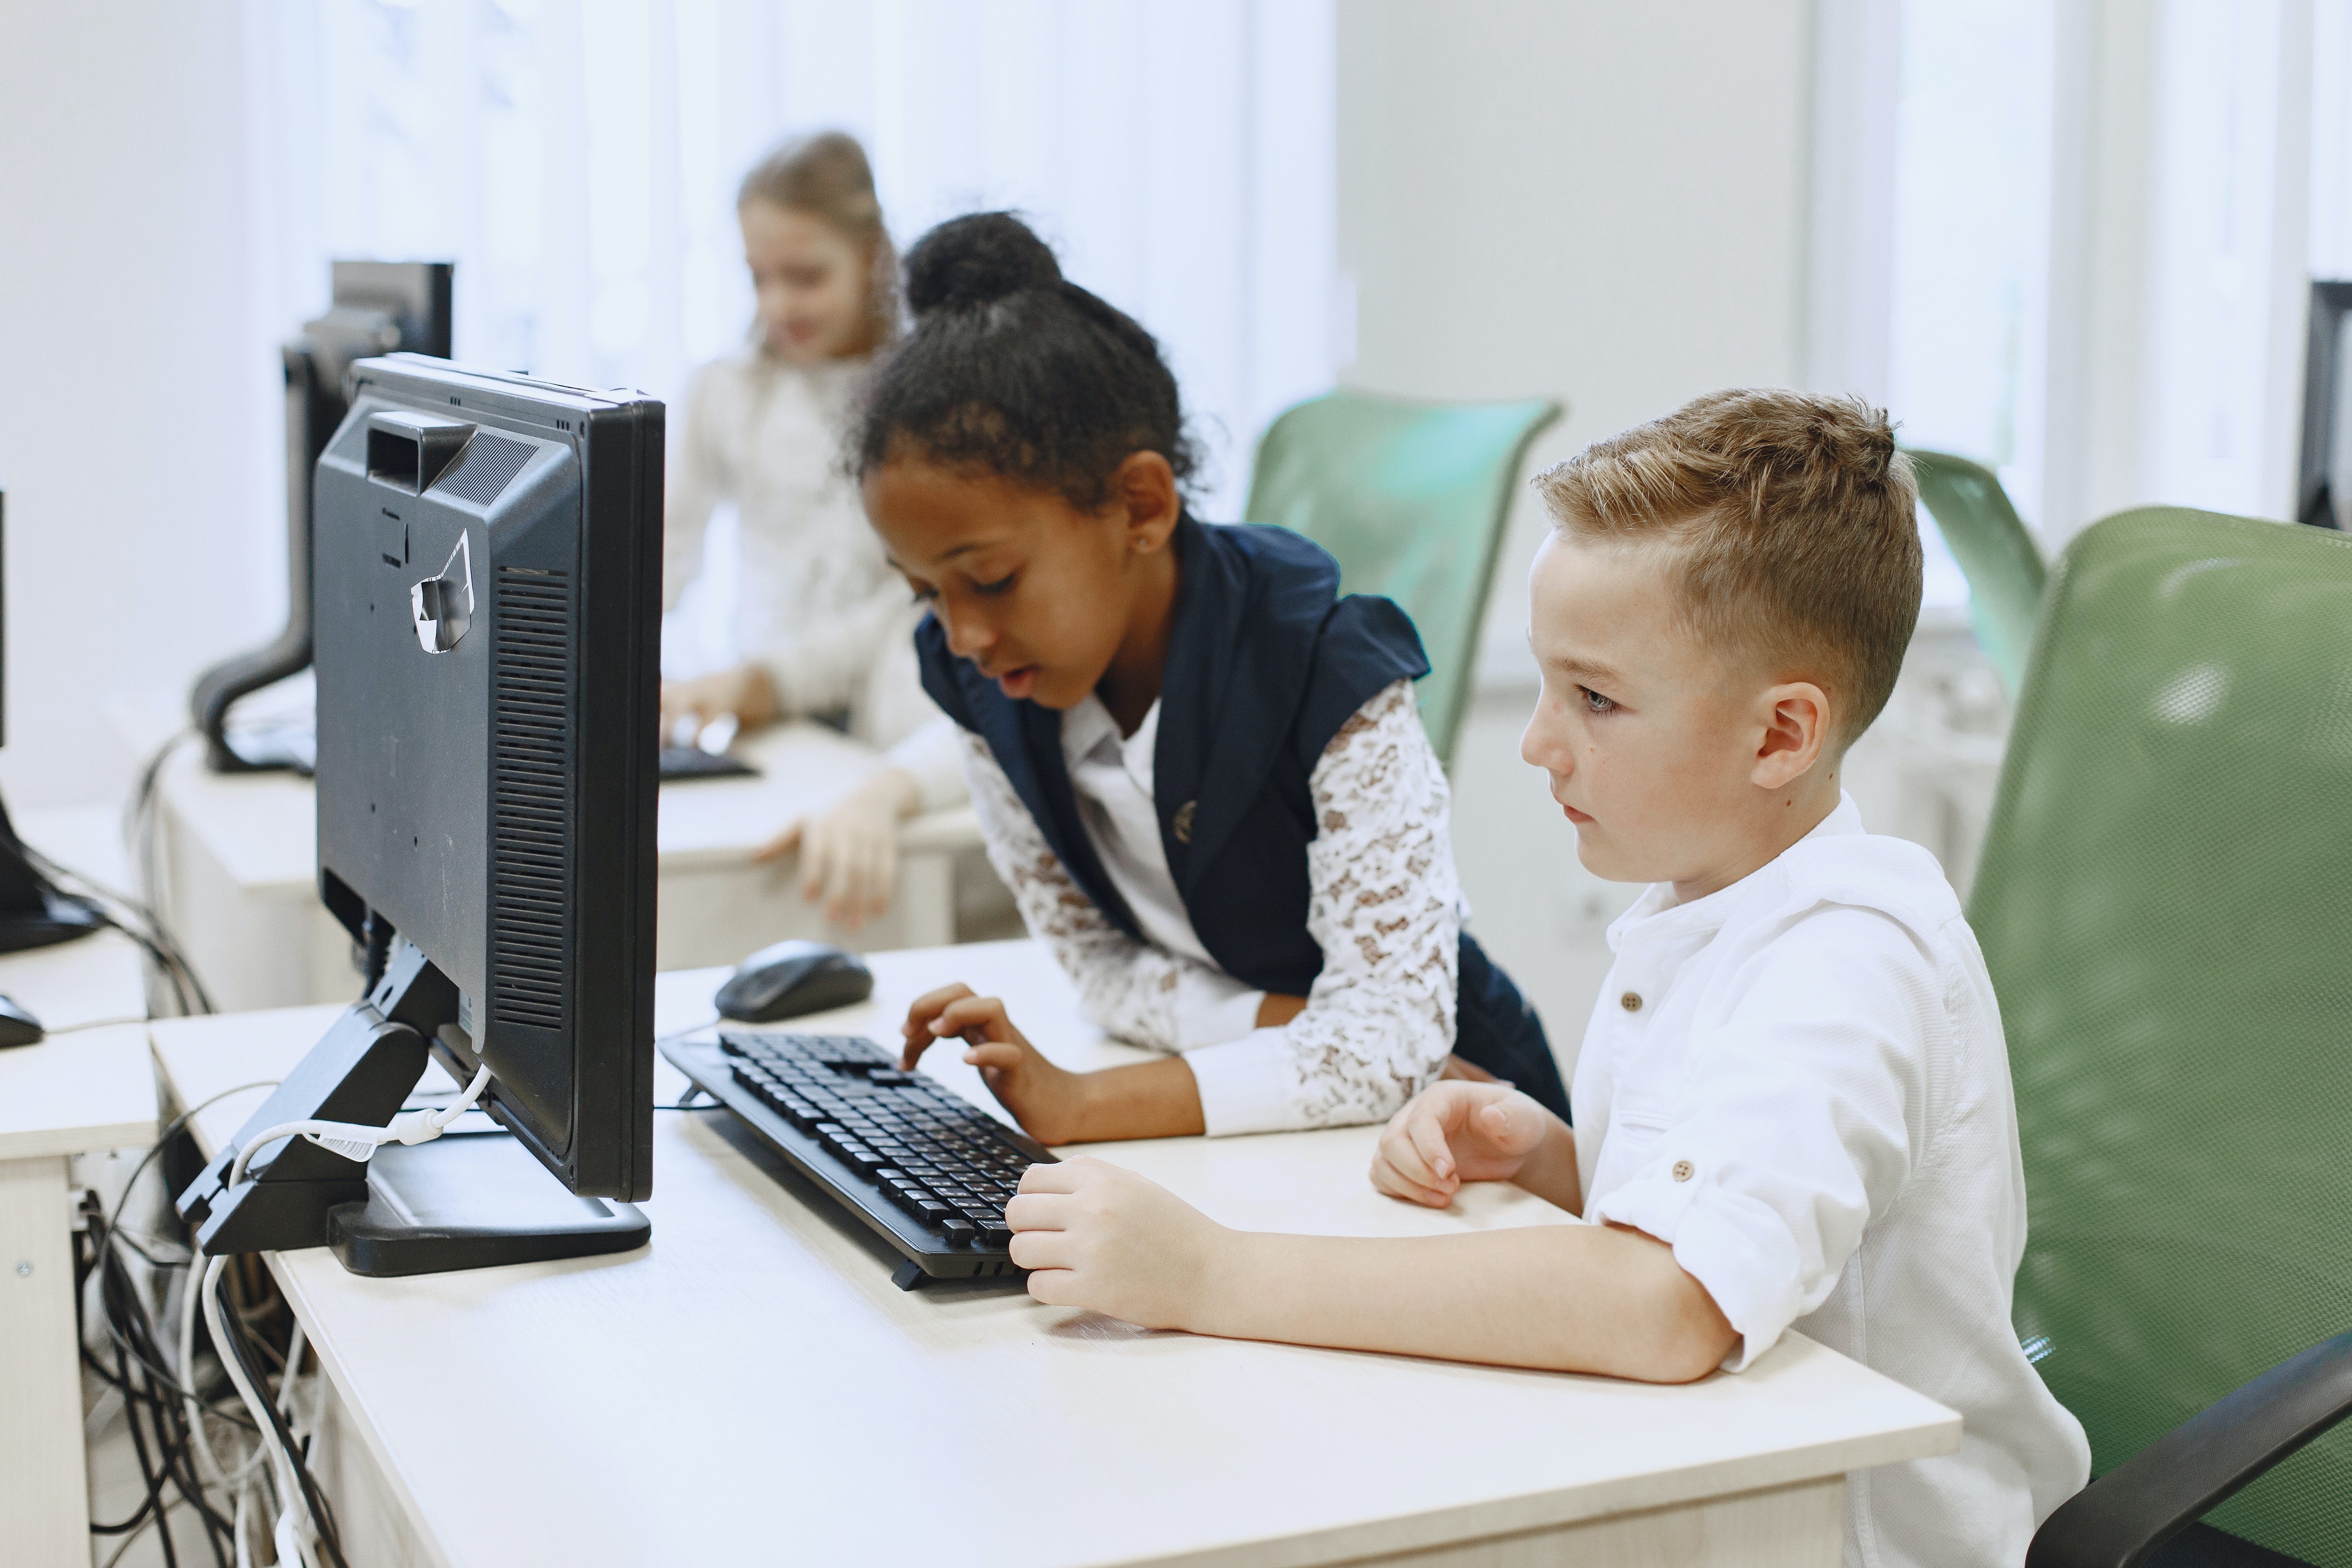 Two children, a boy and a girl working on a computer together.